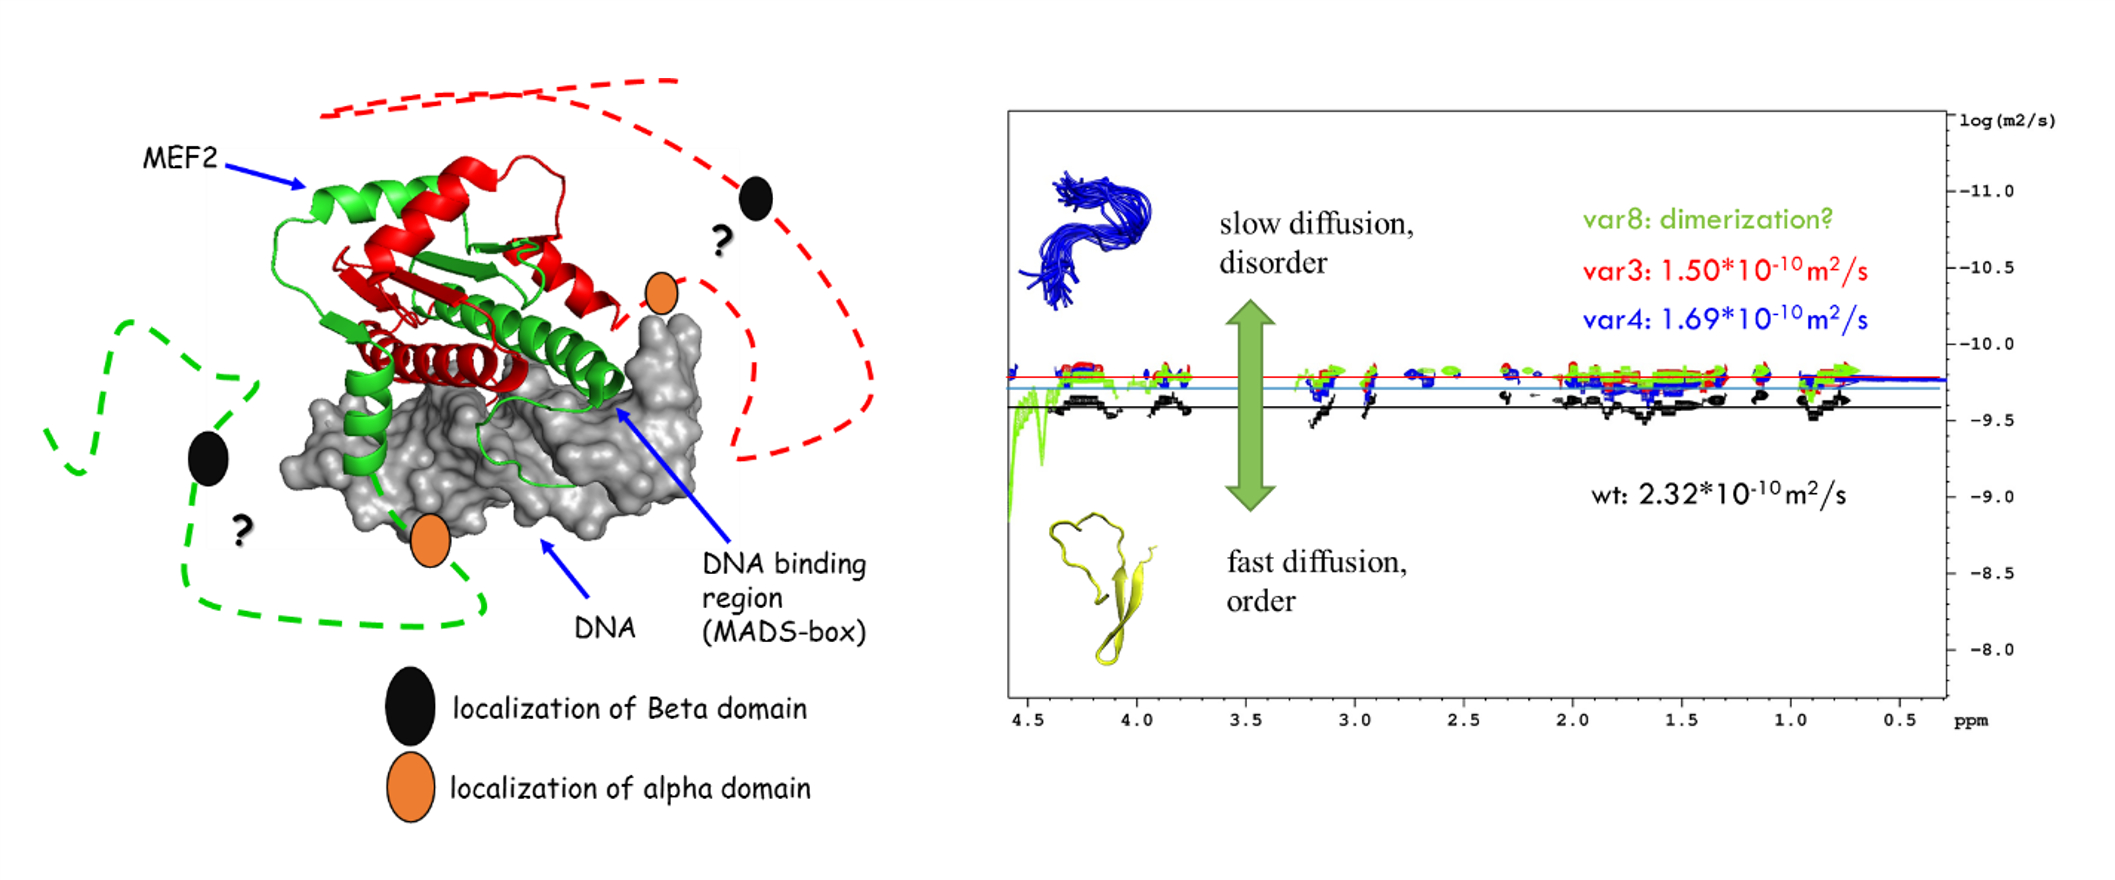 Left: NMR s<i>tructure of MEF2-DNA complex (PDB:1c7u), MEF2D is displayed by green and red cartoon, scattered lines indicate regions with missing electron density. The localization of the β-domain is represented by black circles. Right: comparing the results of diffusion NMR-experiments (37AA peptides).</i>